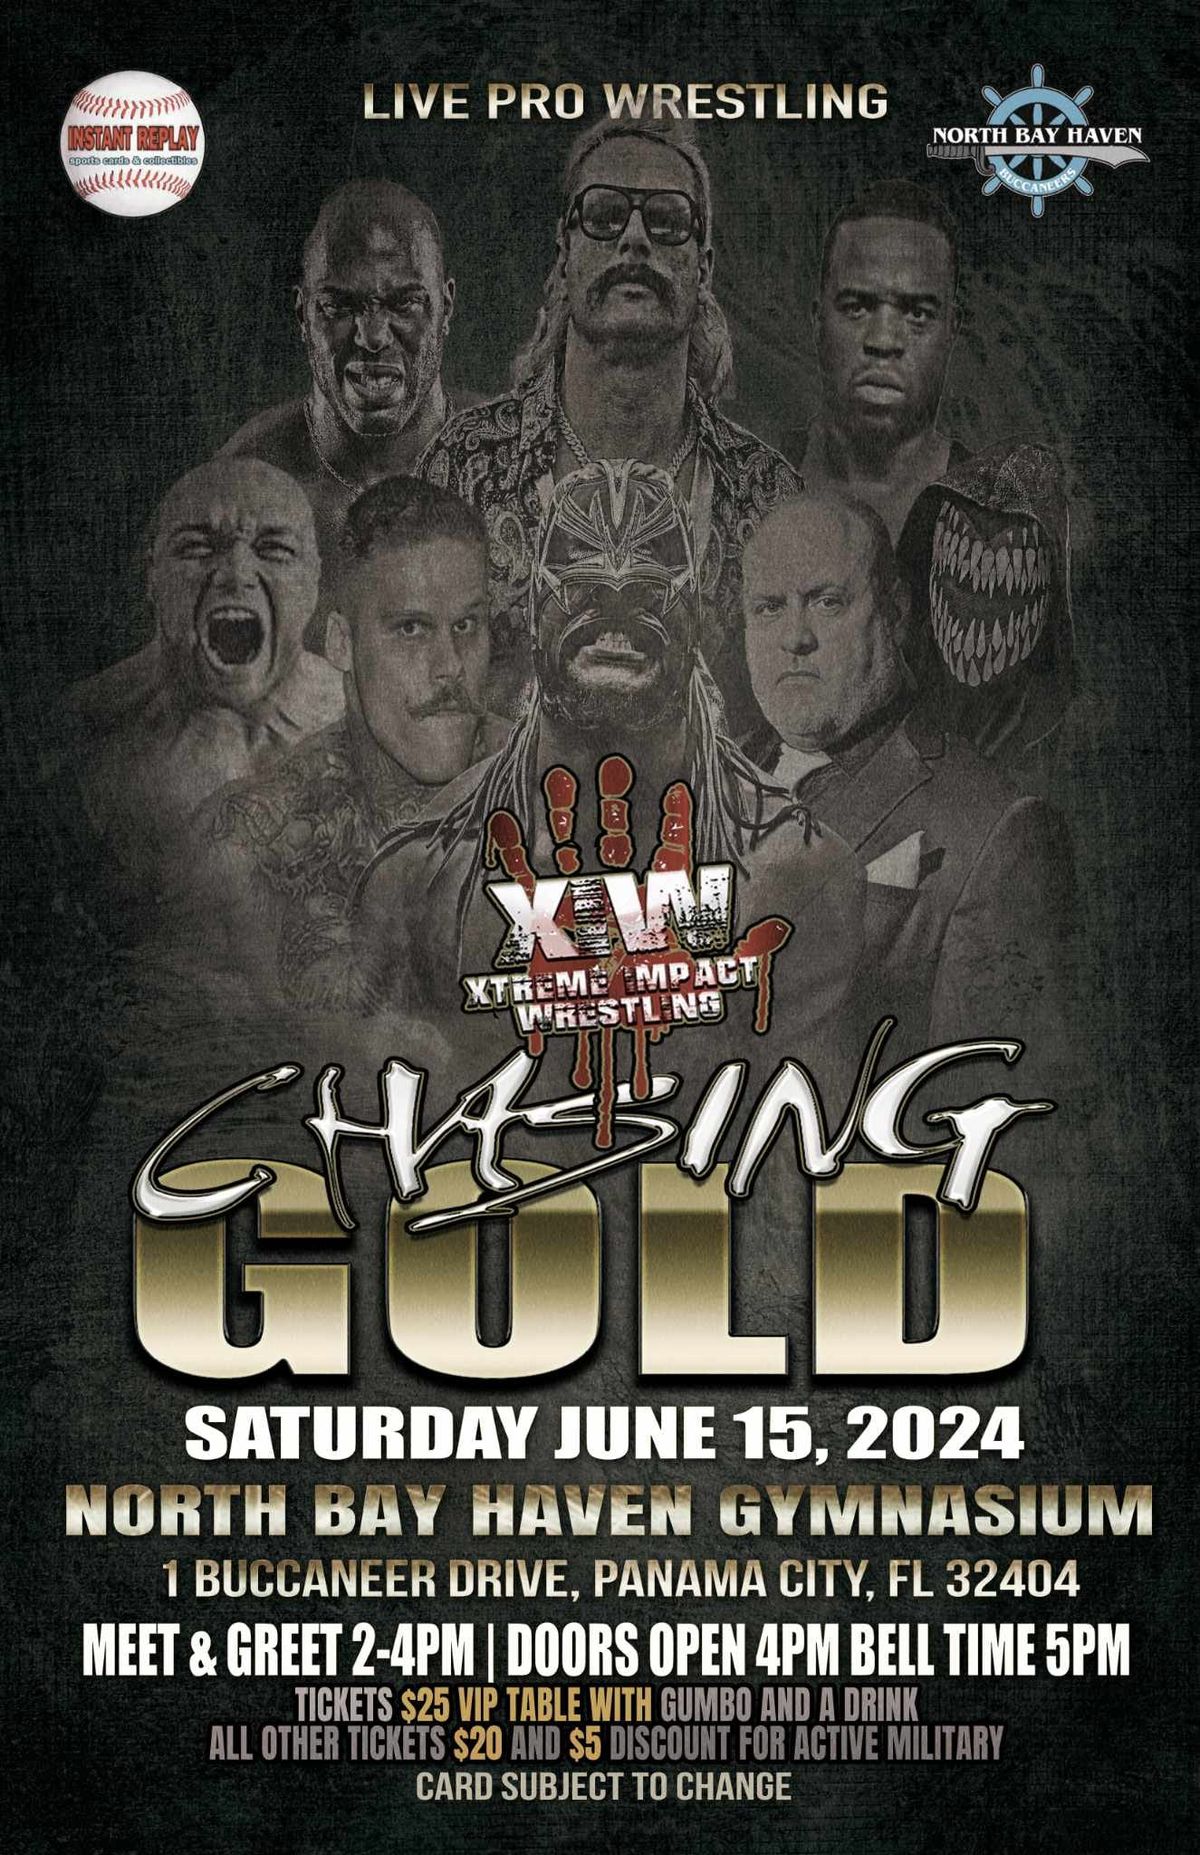 Live Pro Wrestling returns to Panama City, Fl. with XIW at North Bay Haven